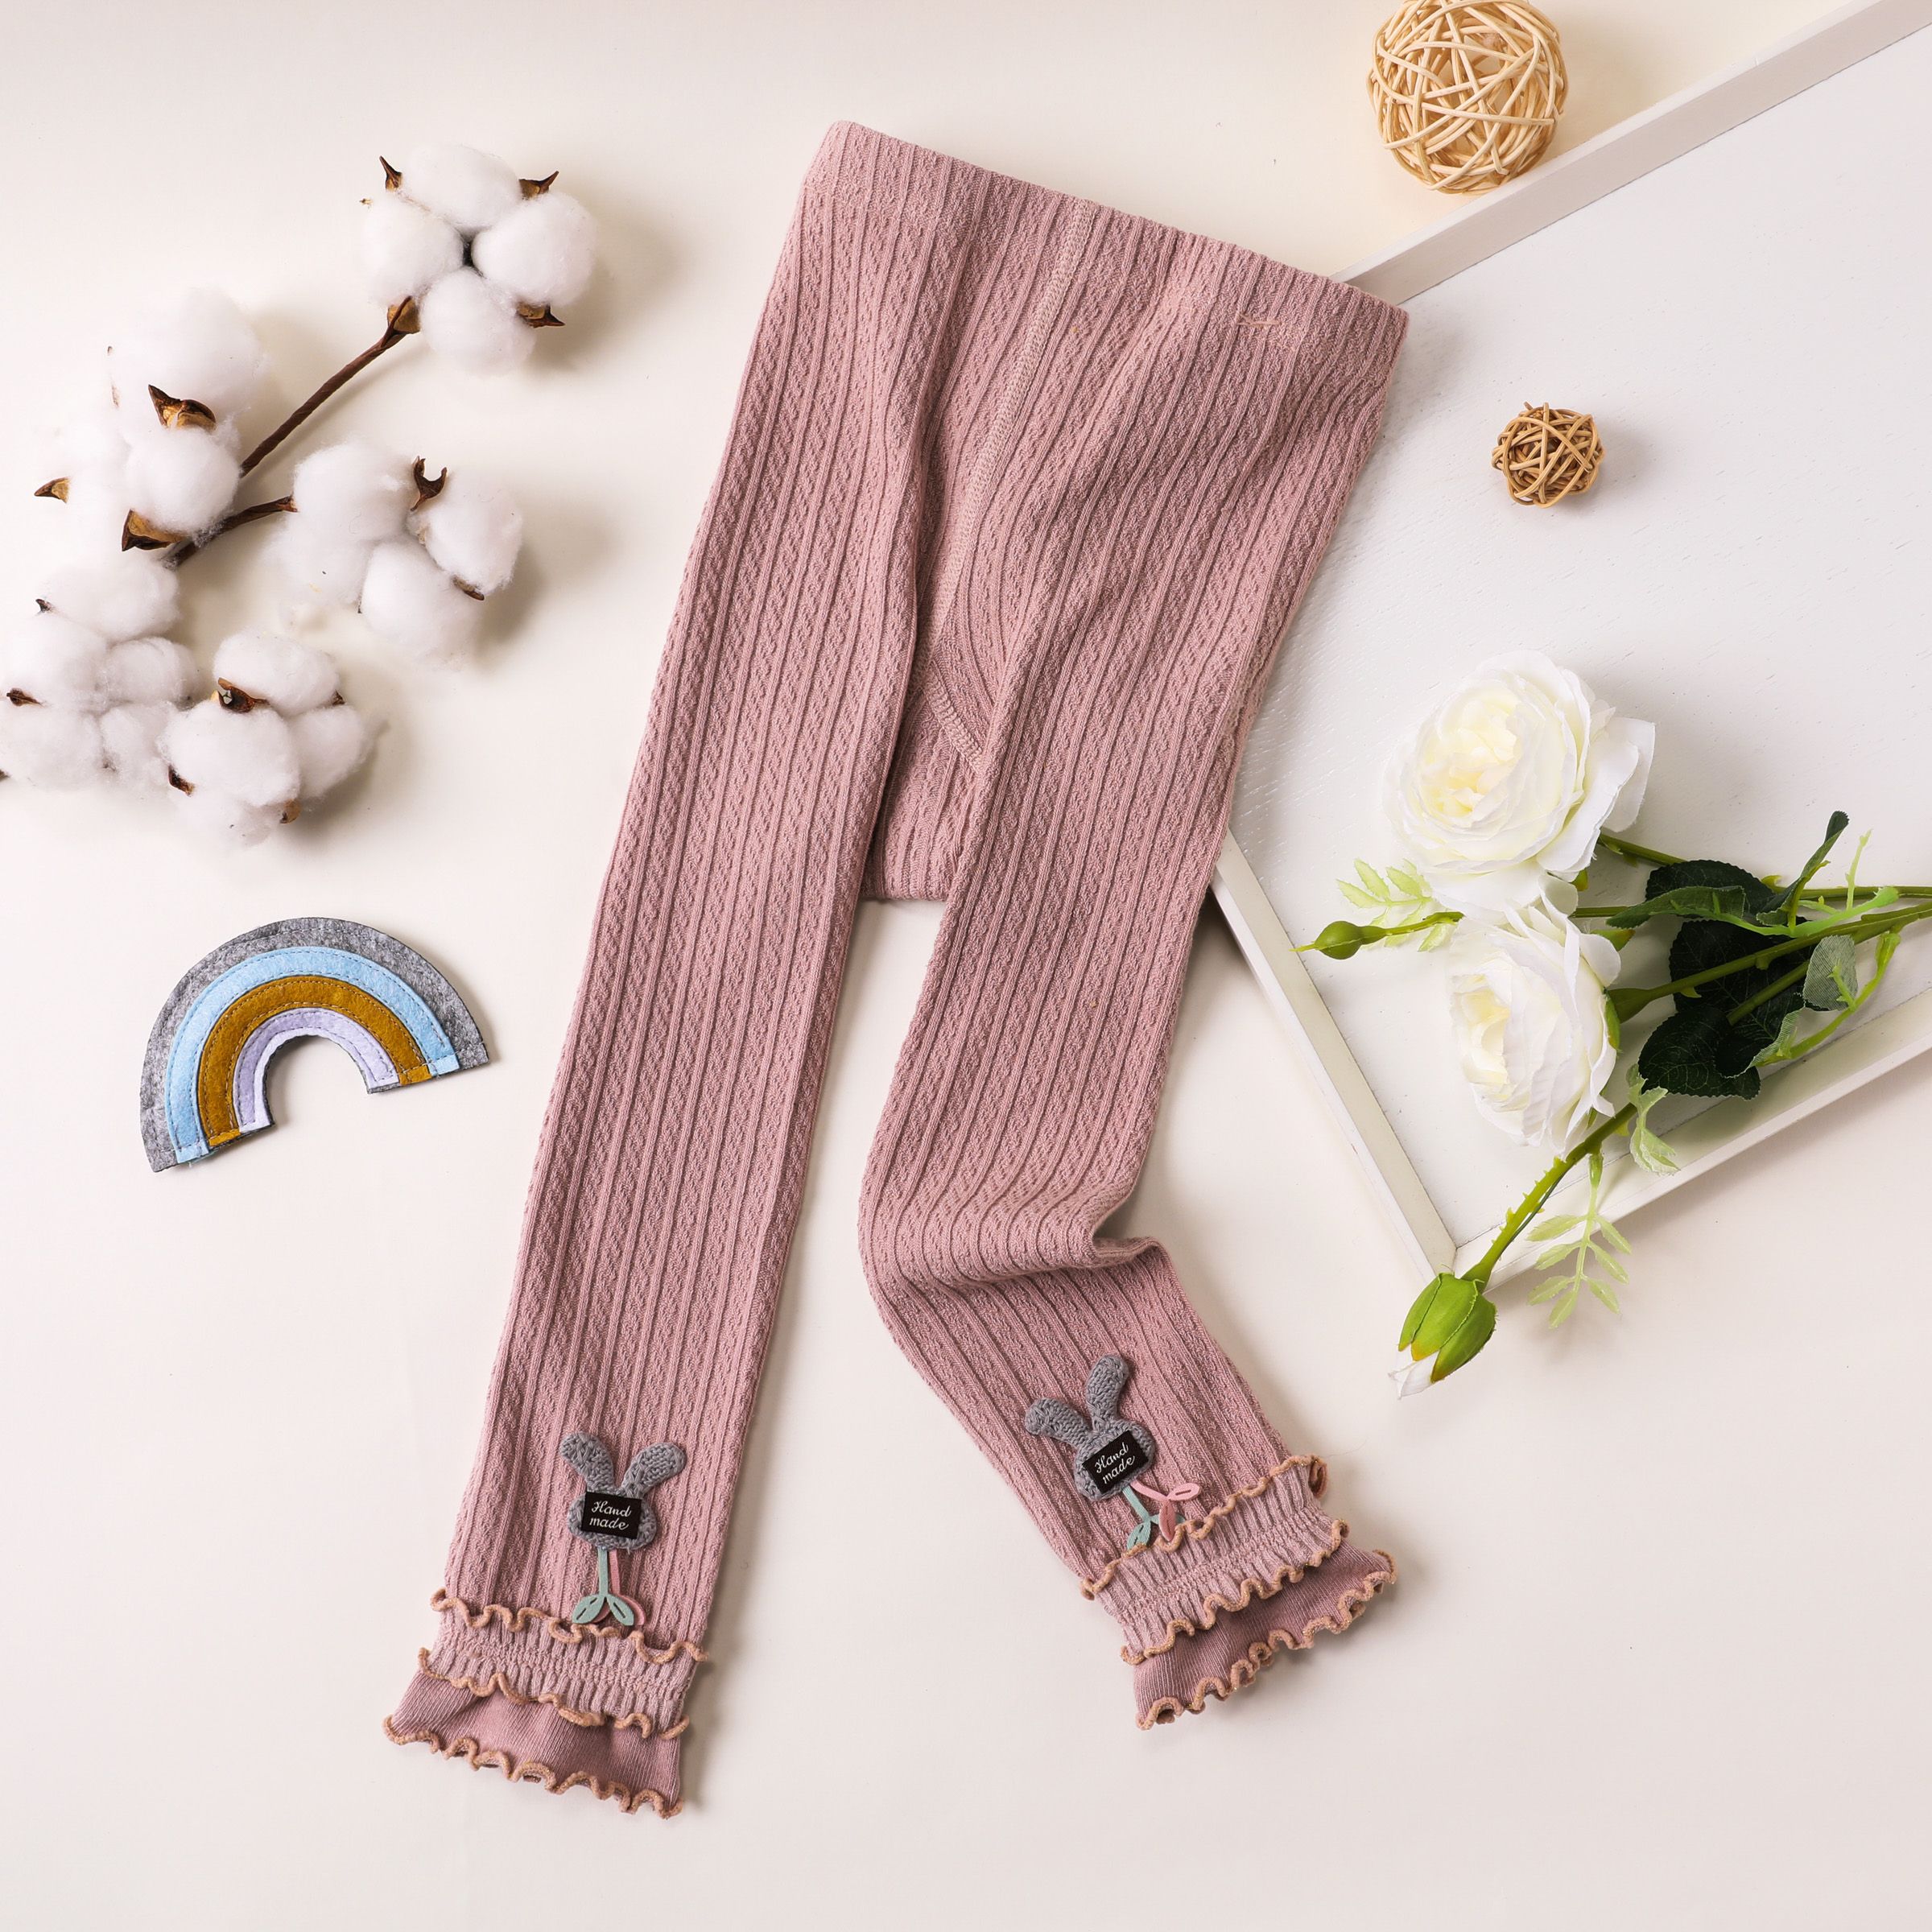 Baby/toddler Three-Layered Cotton Leggings with Elegant Edging and Shiny Thread, Features Dual-Purpo